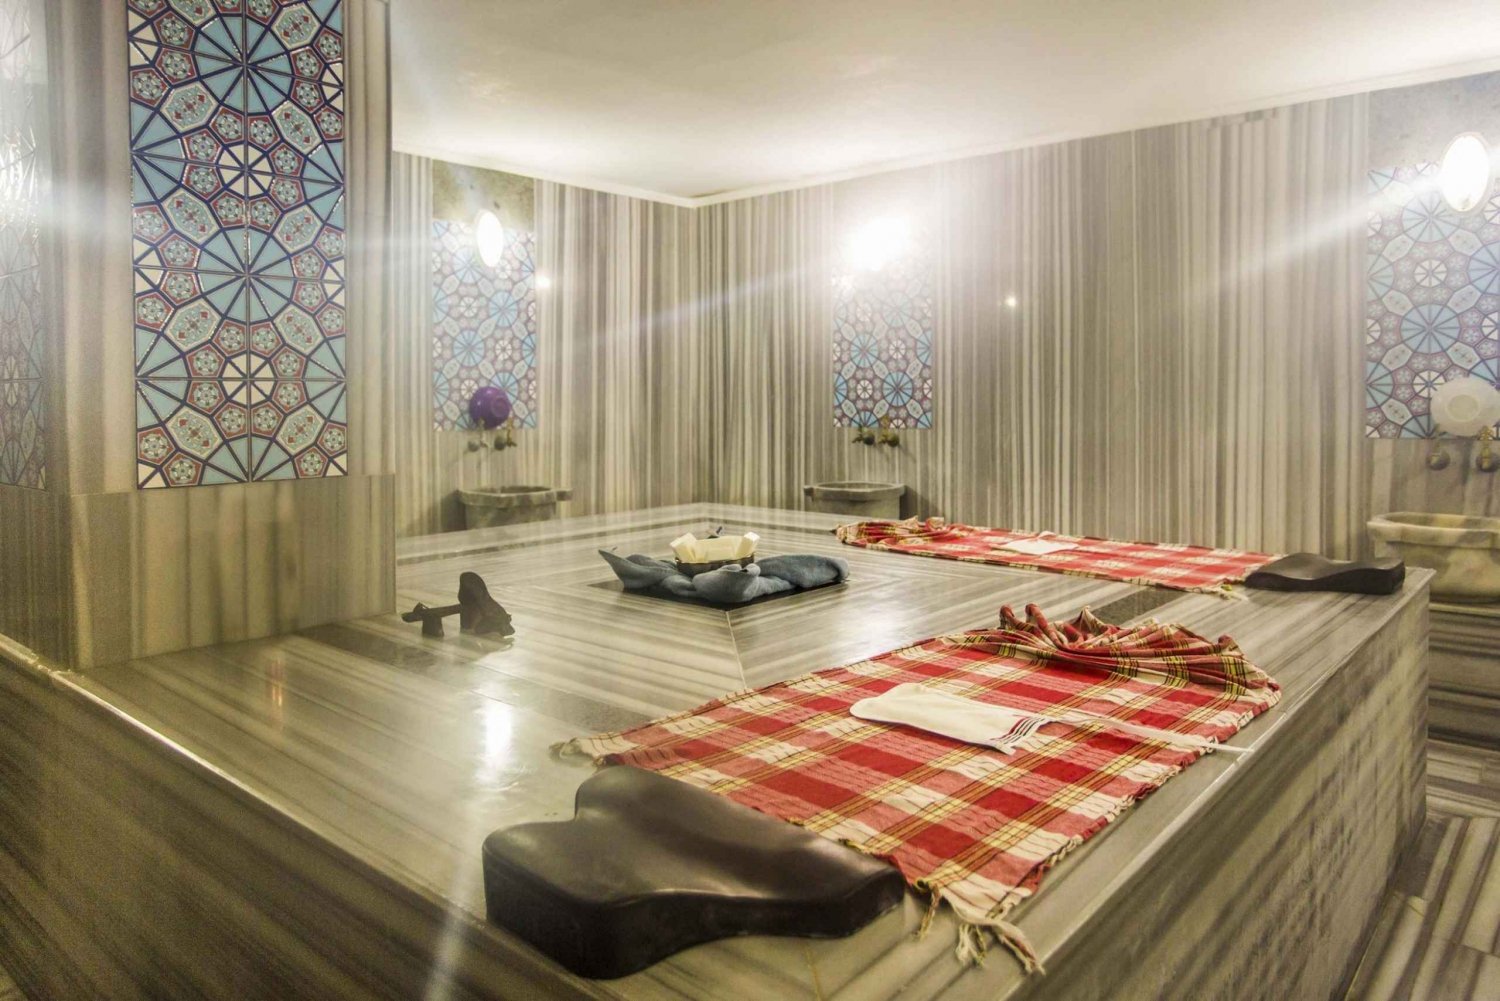 Full-Day Turkish Bath Experience in Bodrum